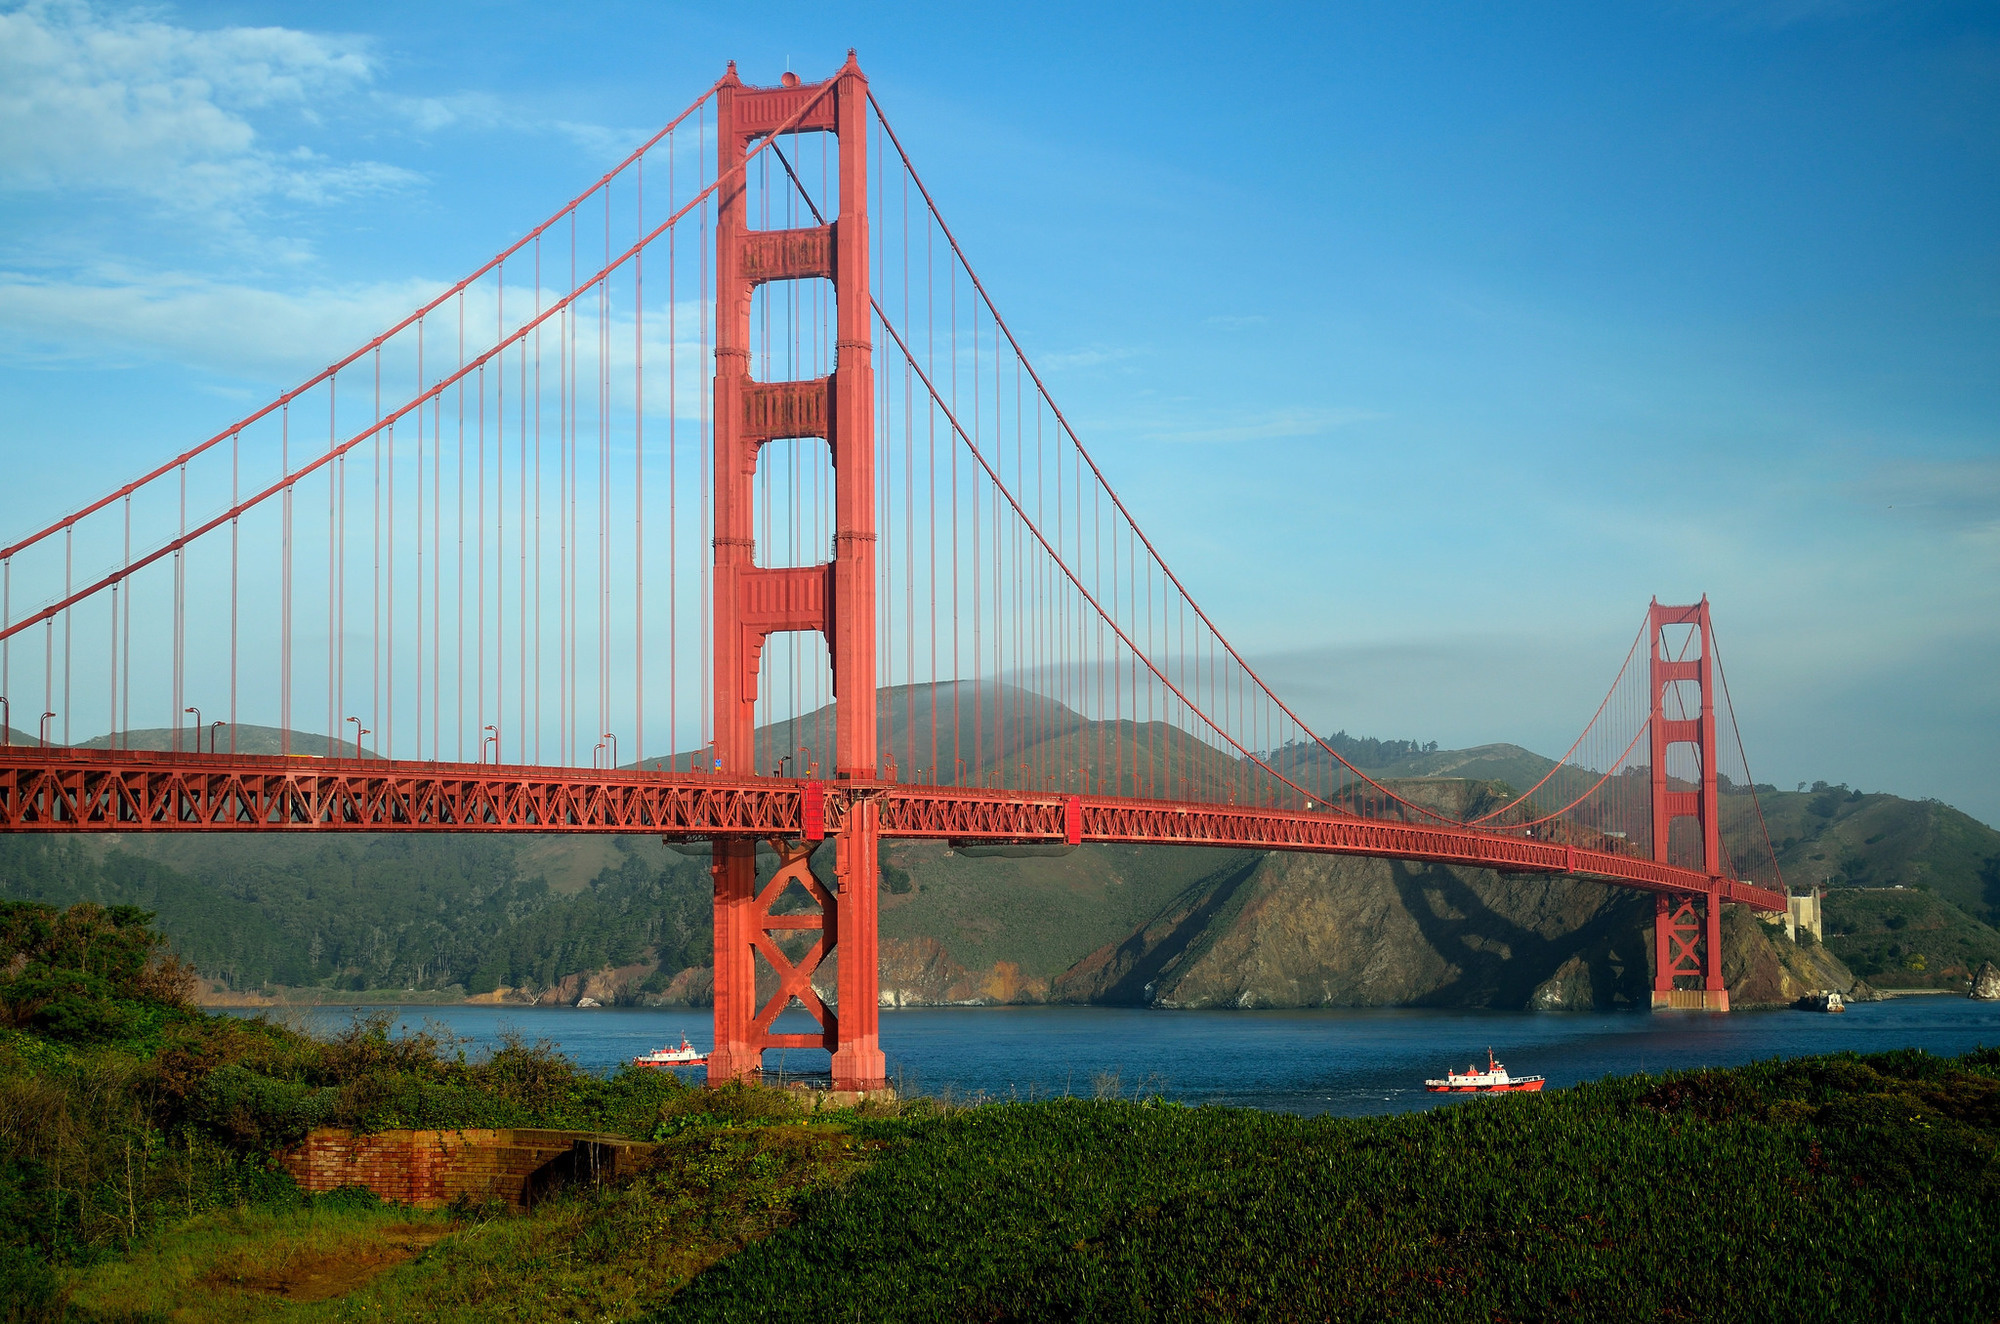 The Golden Gate Bridge in San Francisco, California is the number one suicide site in the world.
2013, was the worst year for suicides at the bridge with 46 people taking their lives there.